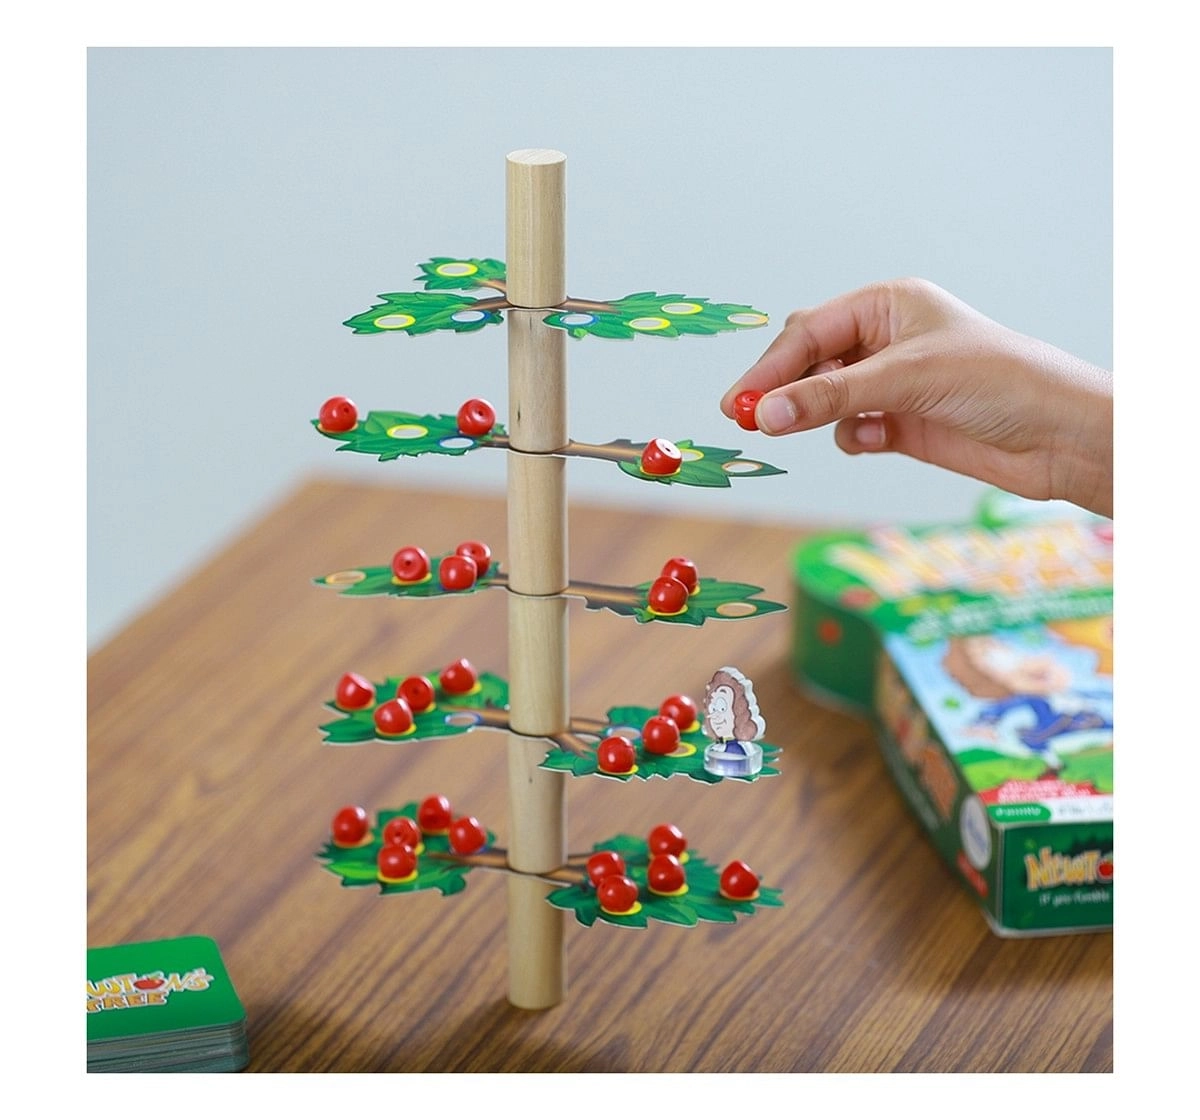 Skillmatics Newton'S Tree | Fun Family Game Of Balancing And Skill For Kids Ages 6 And Up  Games for Kids age 6Y+ 